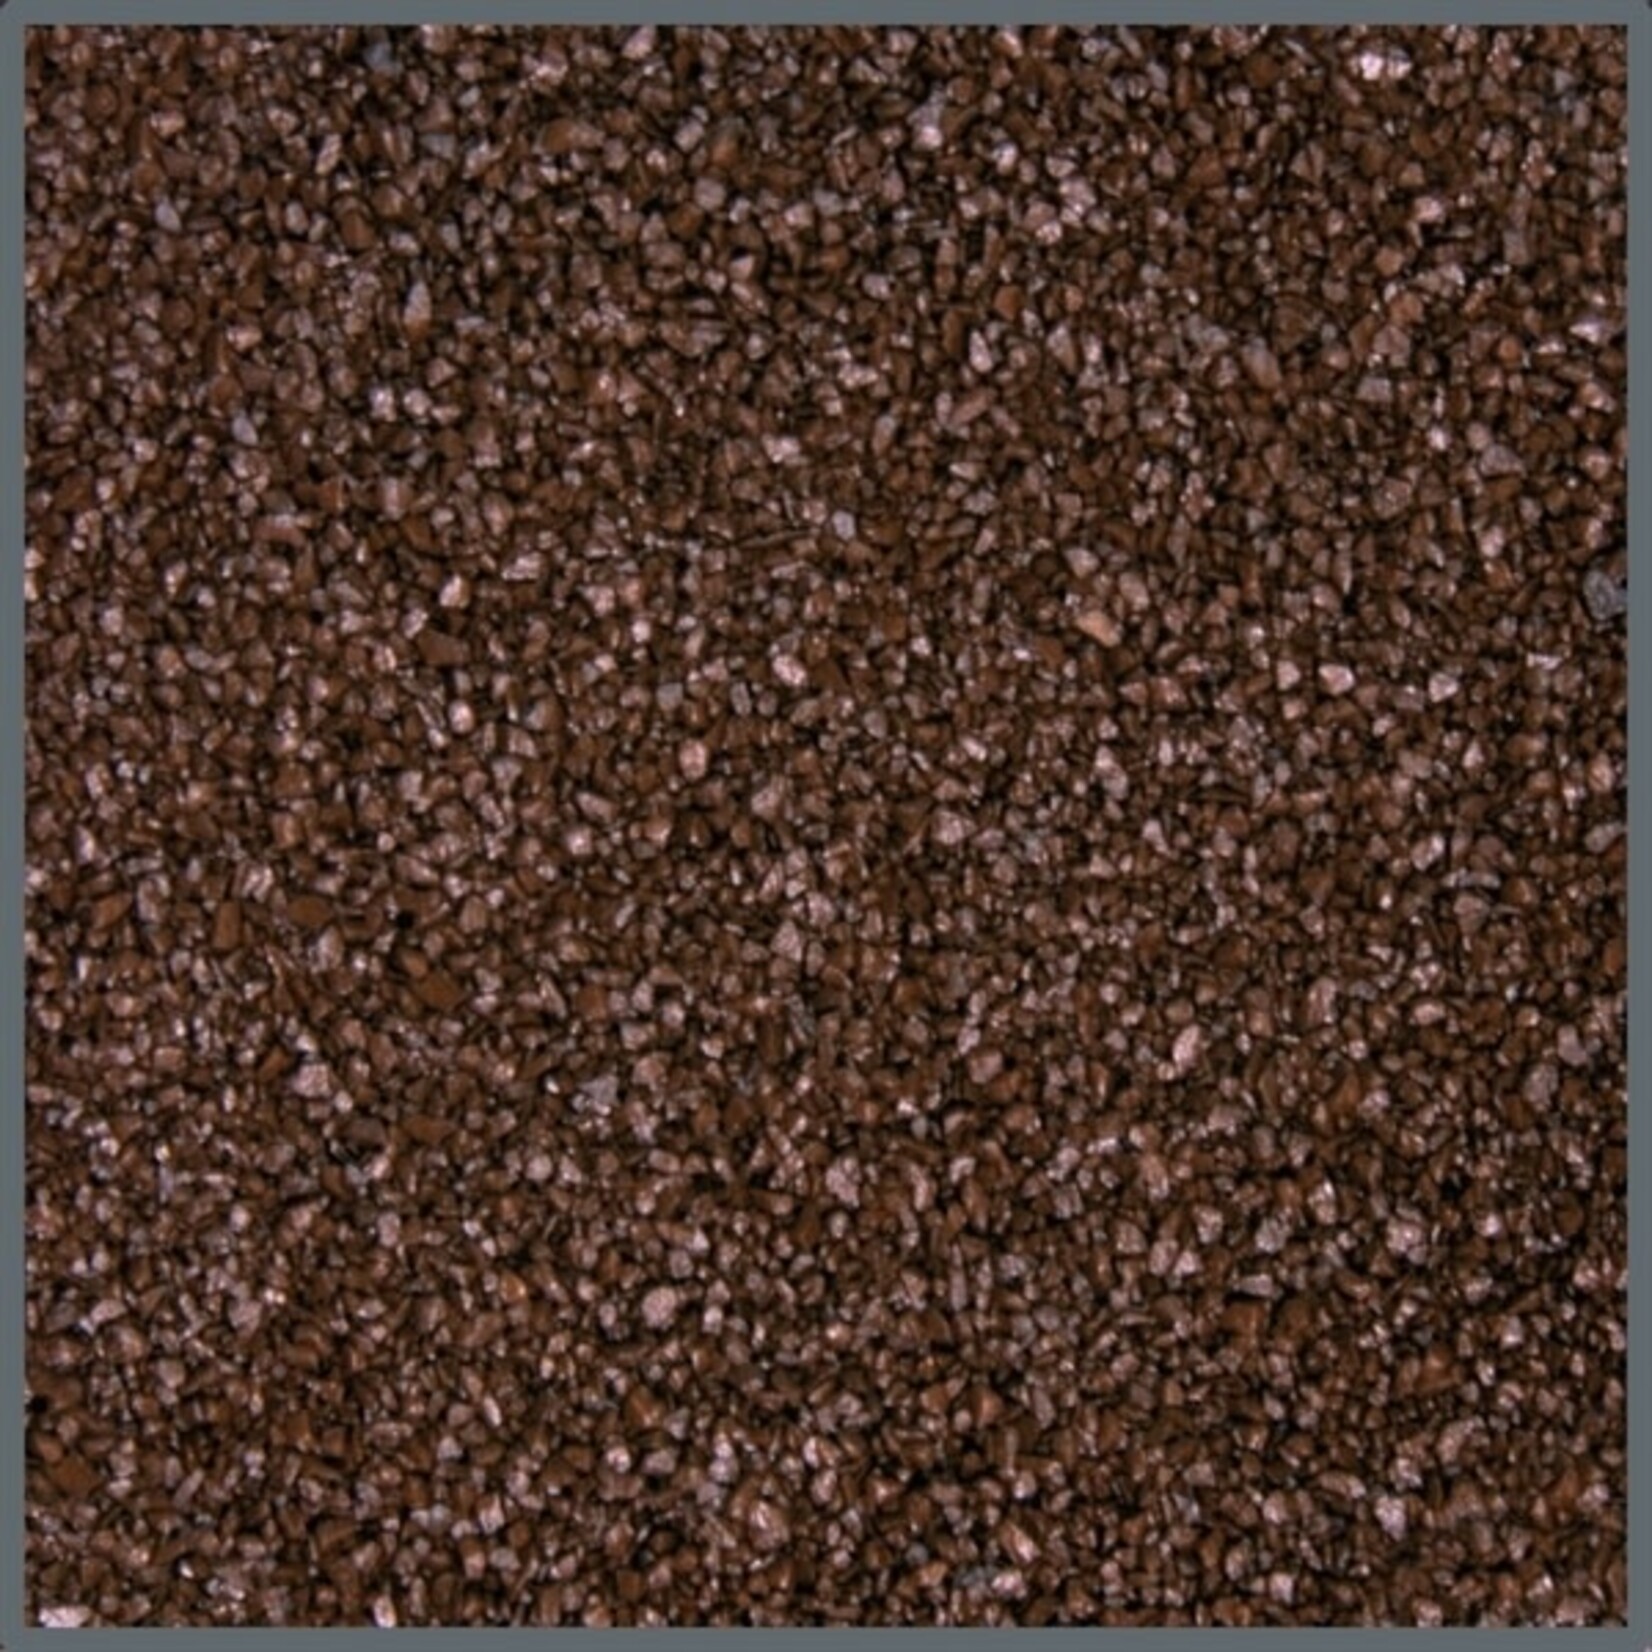 Dupla Ground colour brown chocolate 0.5-1.4 mm 10 kg